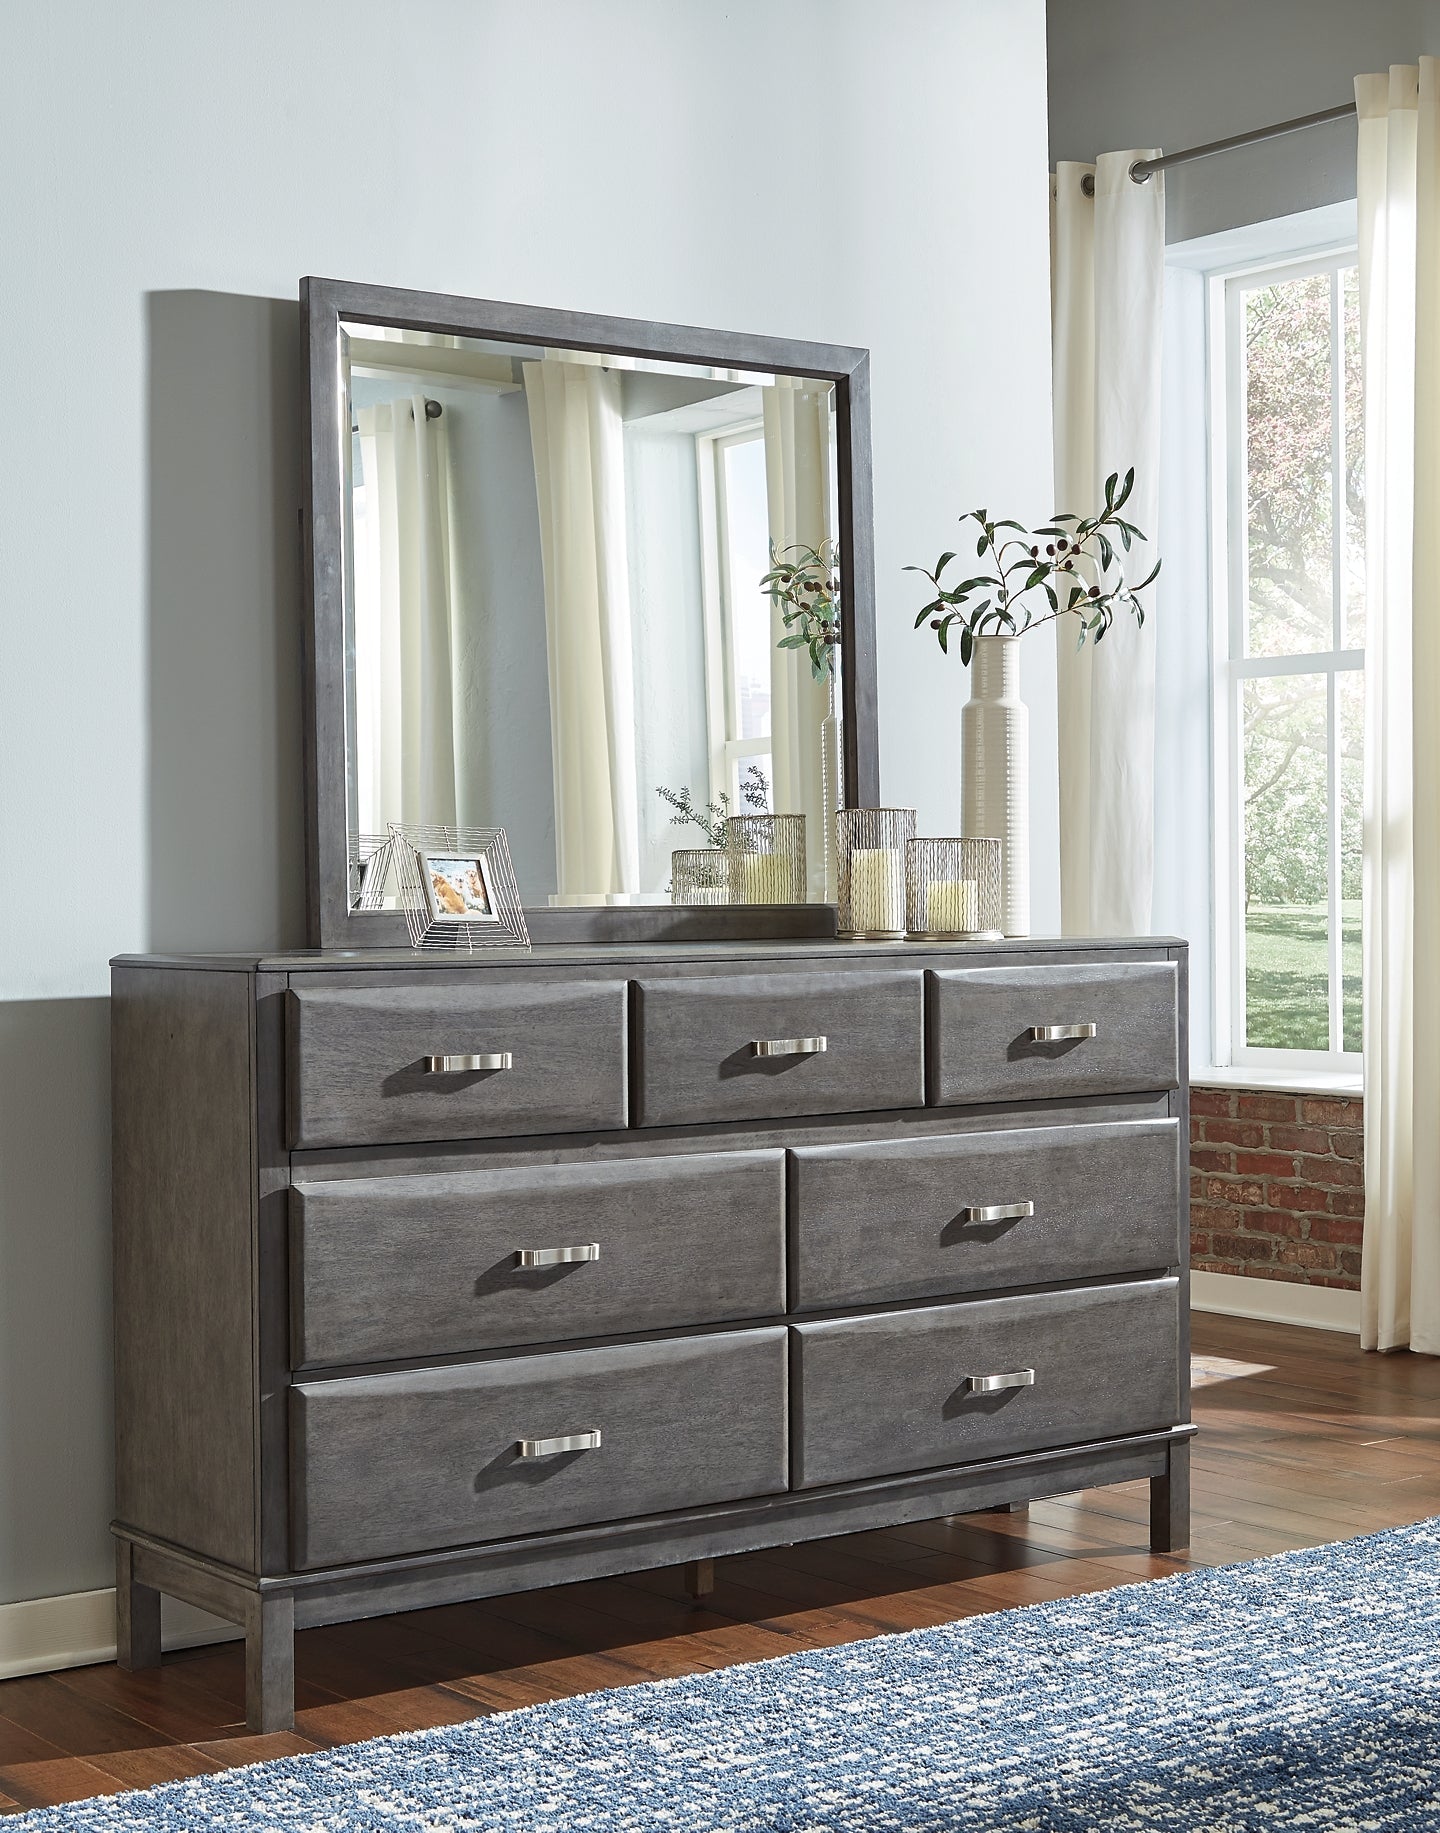 Caitbrook Dresser and Mirror Rent Wise Rent To Own Jacksonville, Florida